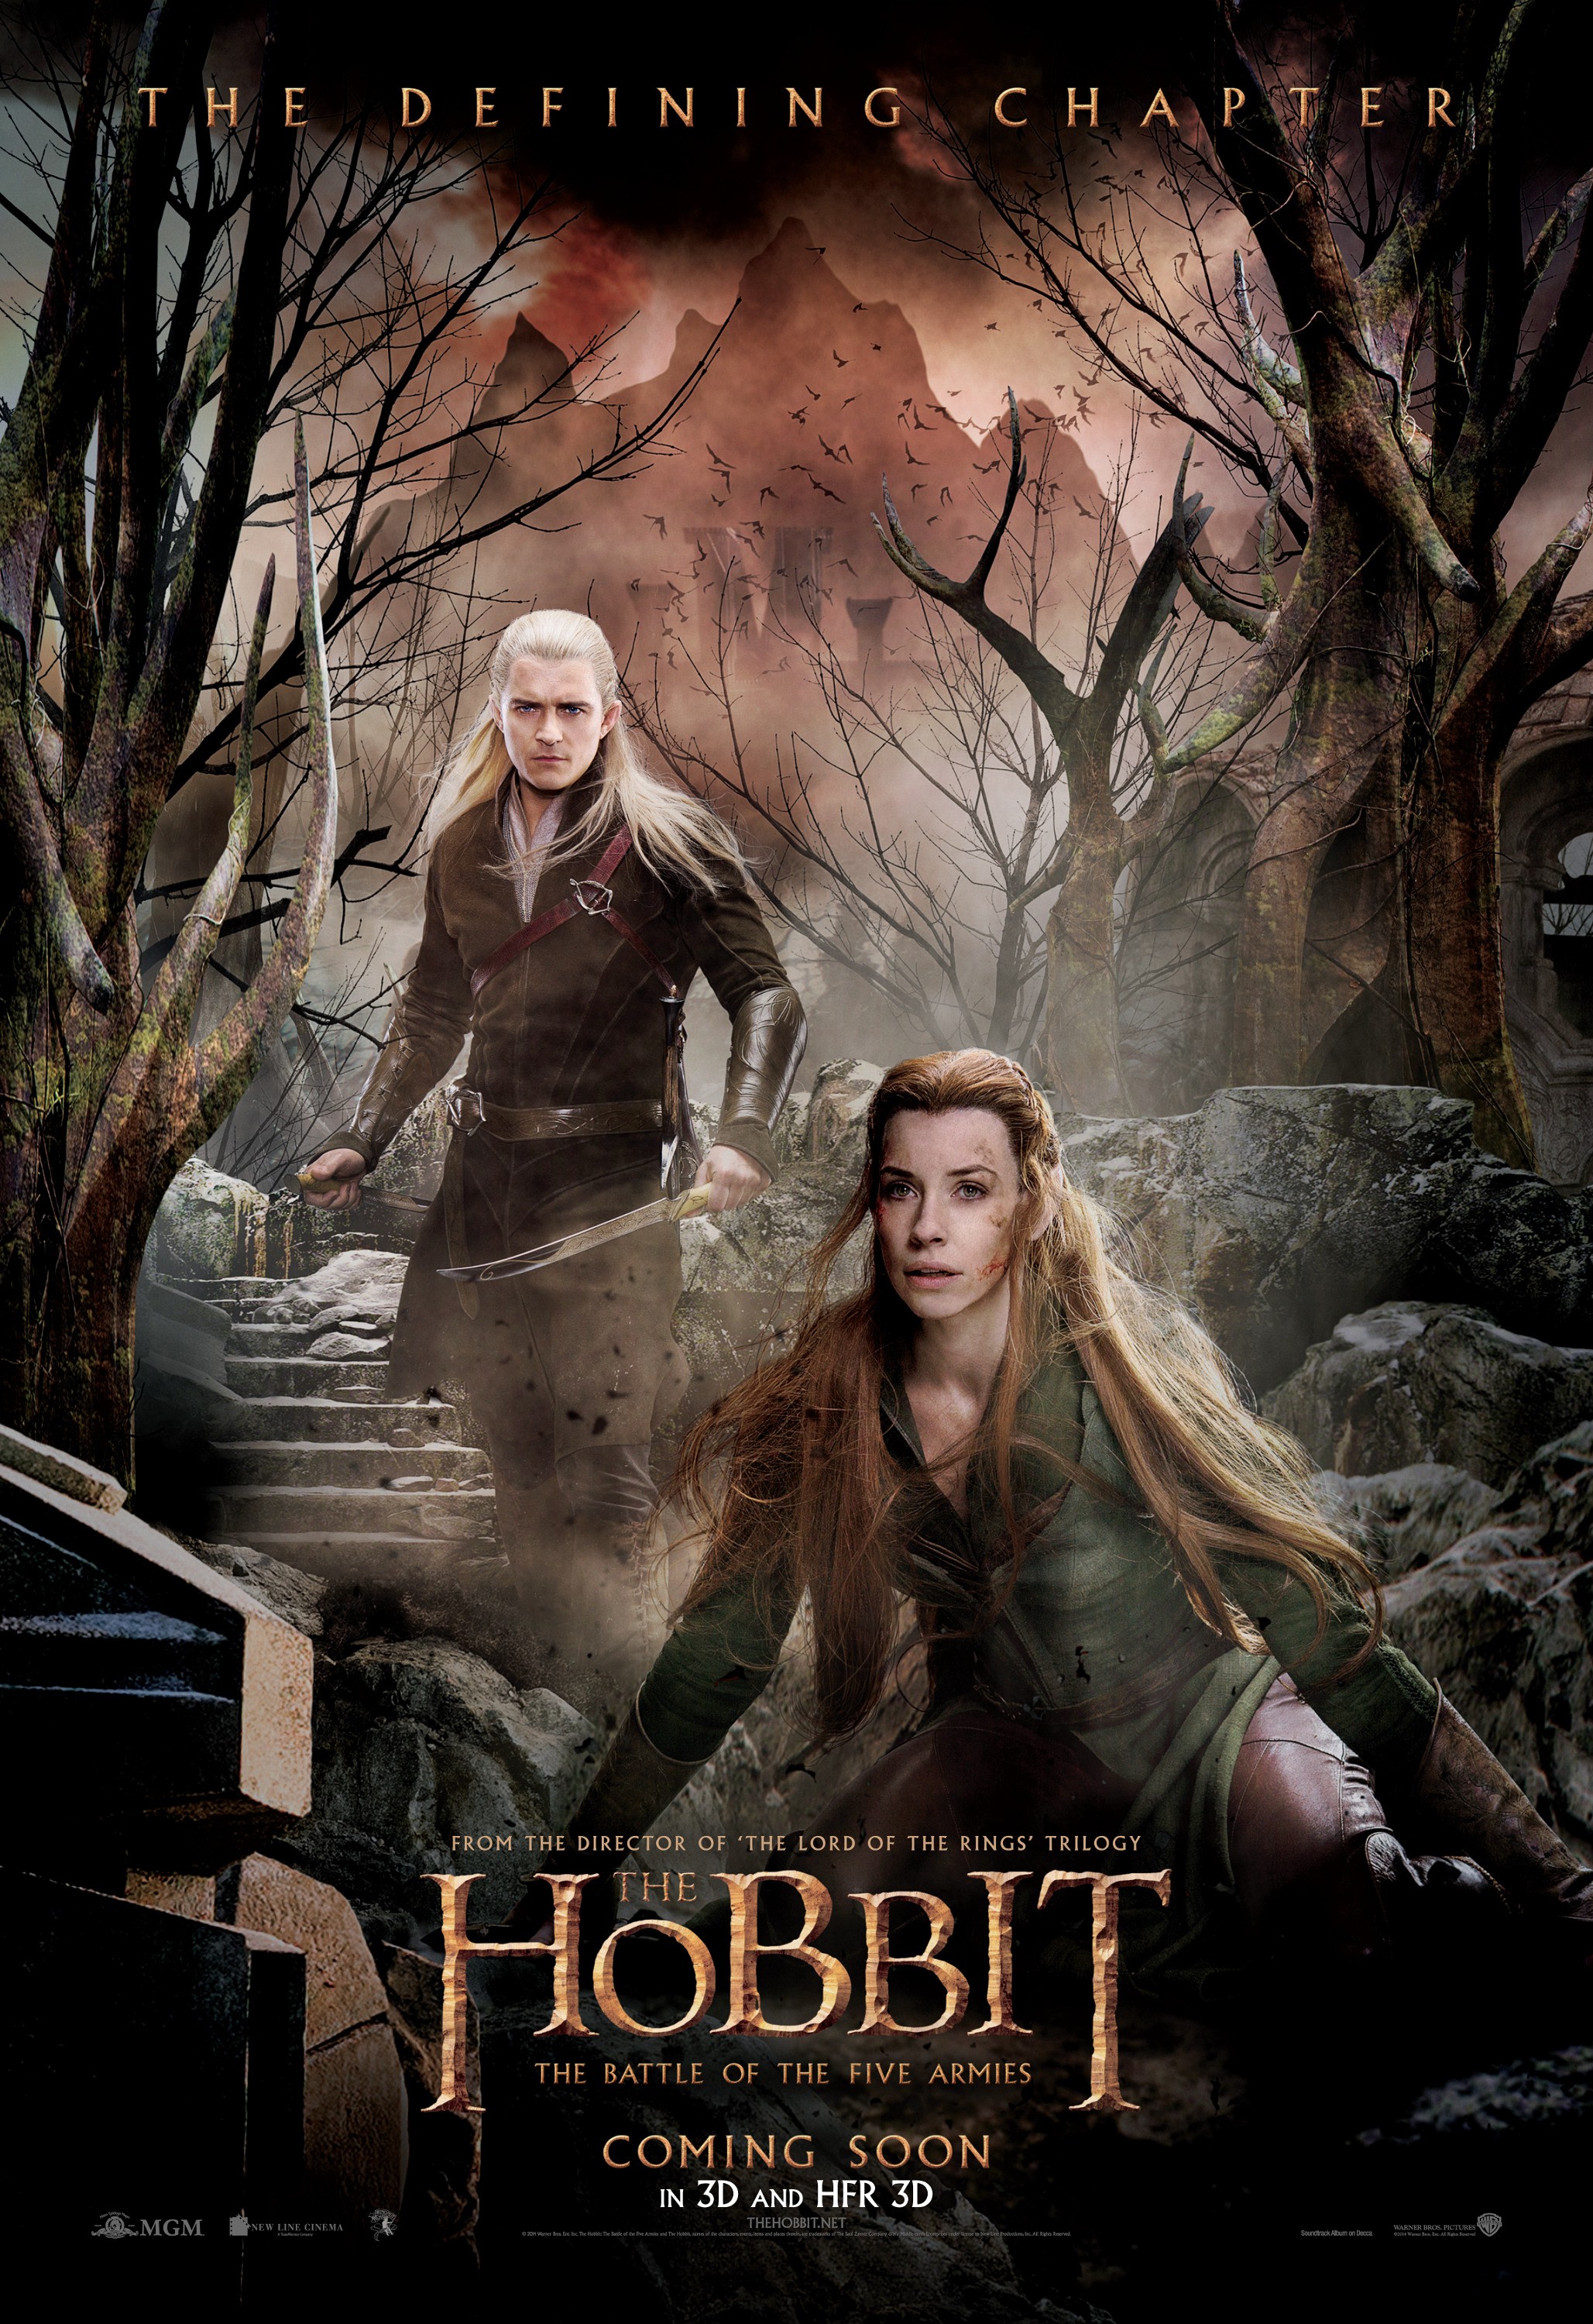 Mega Sized Movie Poster Image for The Hobbit: The Battle of the Five Armies (#28 of 28)